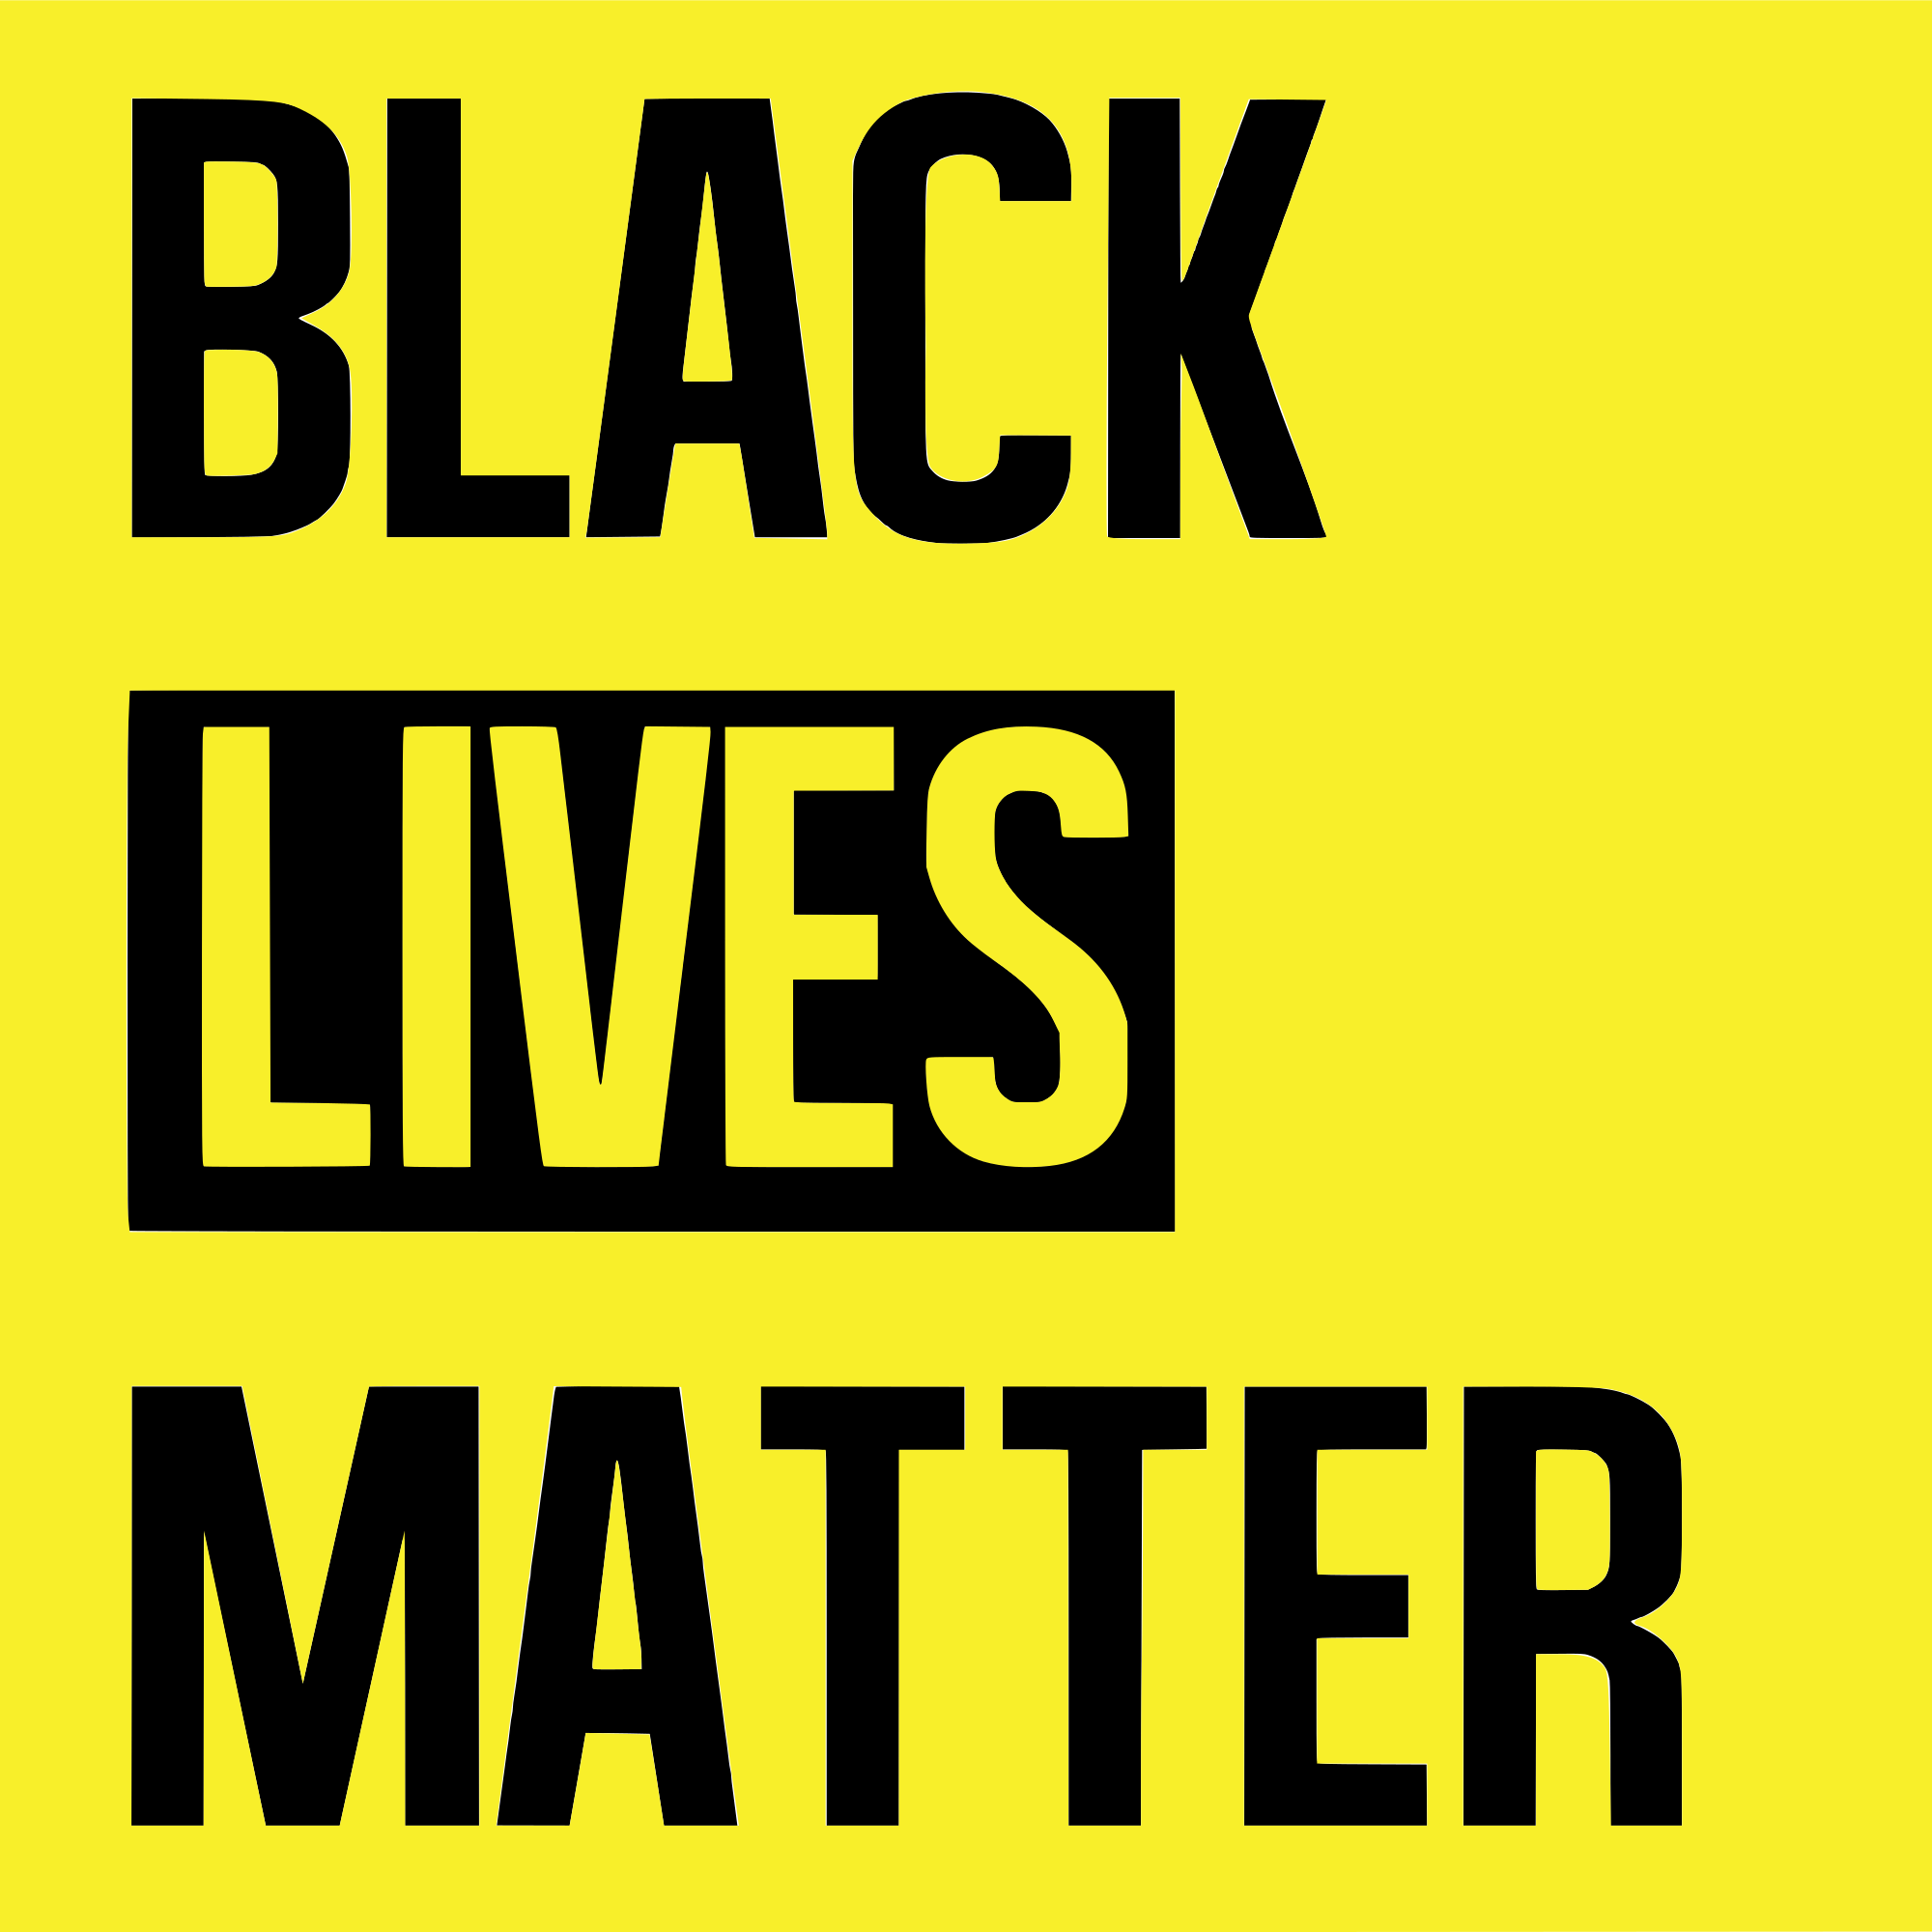 Download Free png Black Lives Matter Png image in Collection